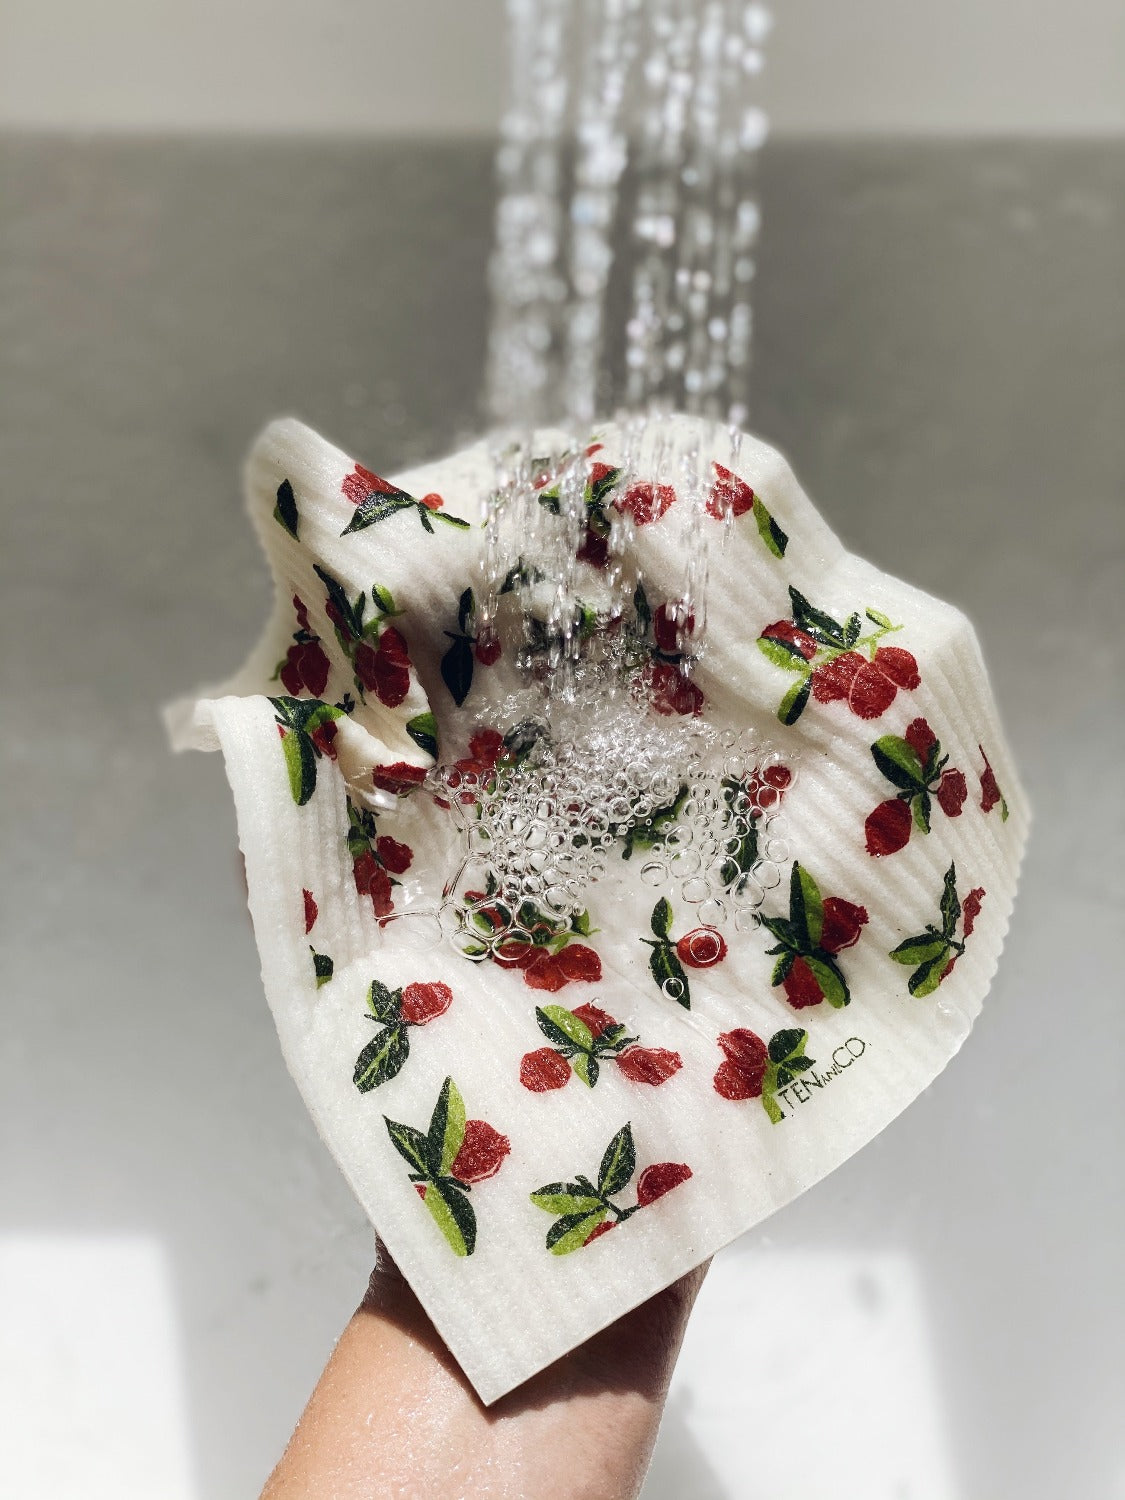 Design image of Cranberry Sponge Cloth. Image is zoomed on the water stream from a sink coming from the top of the image. Sink is white and cloth is being held from underneath, hand coming from the bottom of the image. Water is pooling on top of the cloth.